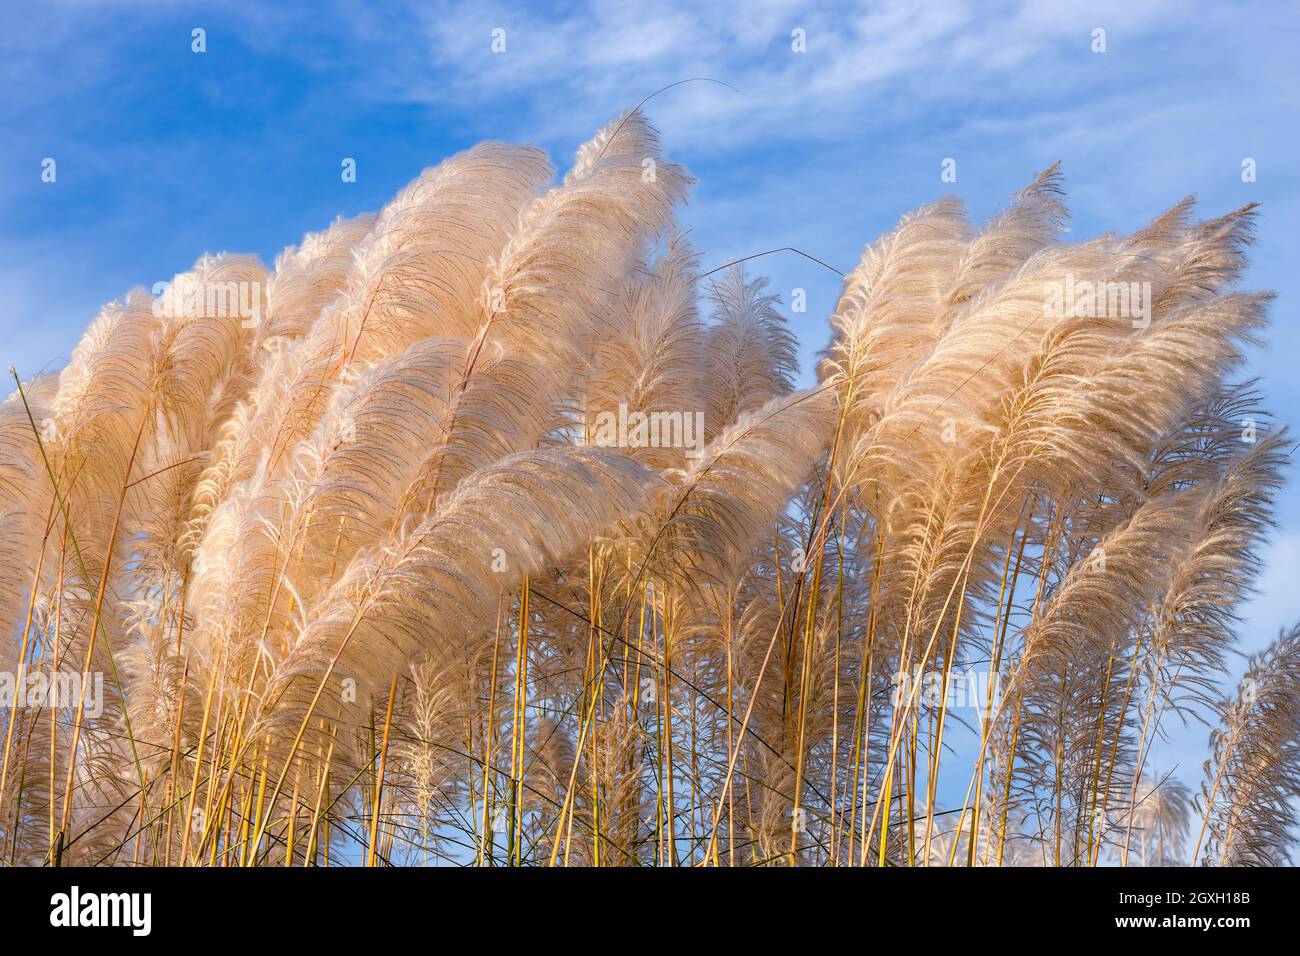 White kans grass or saccharum spontaneum flowers under the bright sunlight close up Stock Photo